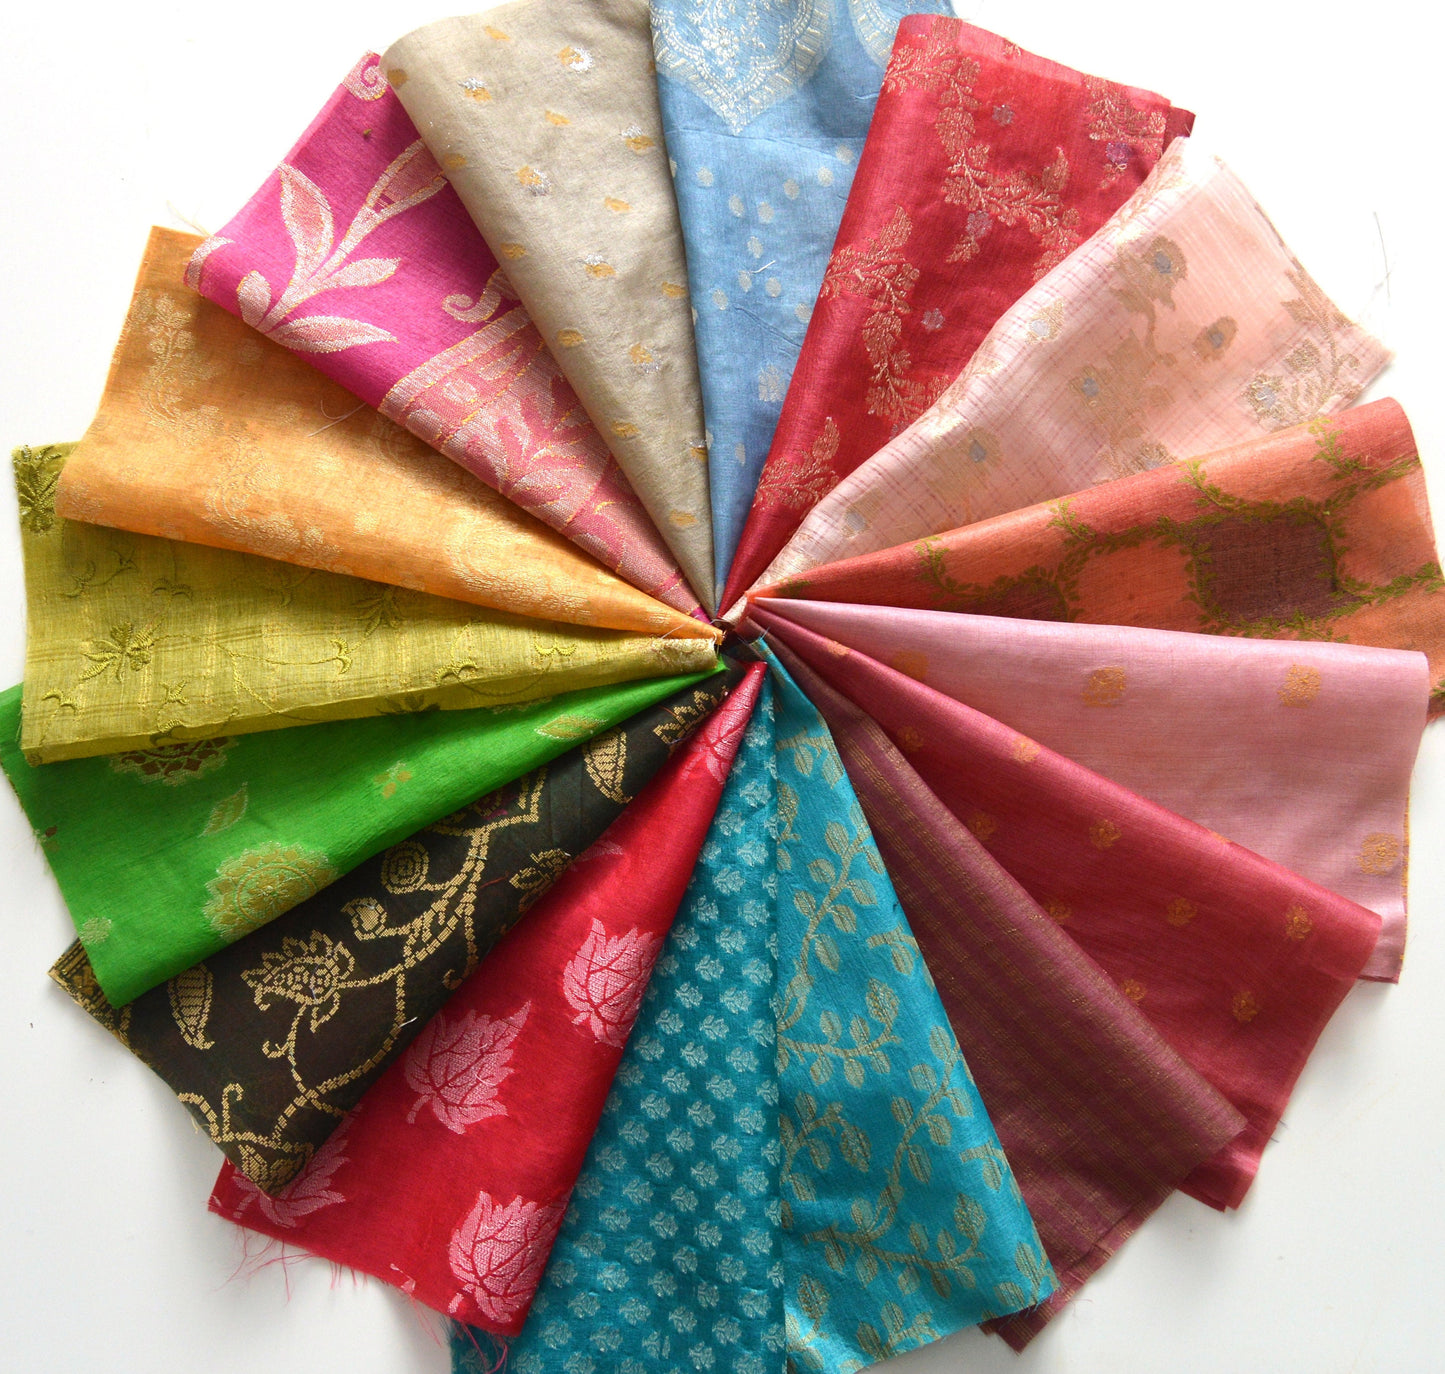 5 Inch x 16 Pieces Mixed Recycled Vintage Sari Squares Brocade Craft Fabric Card Making Collage Mixed Media Textile Art Sewing Junk Journal